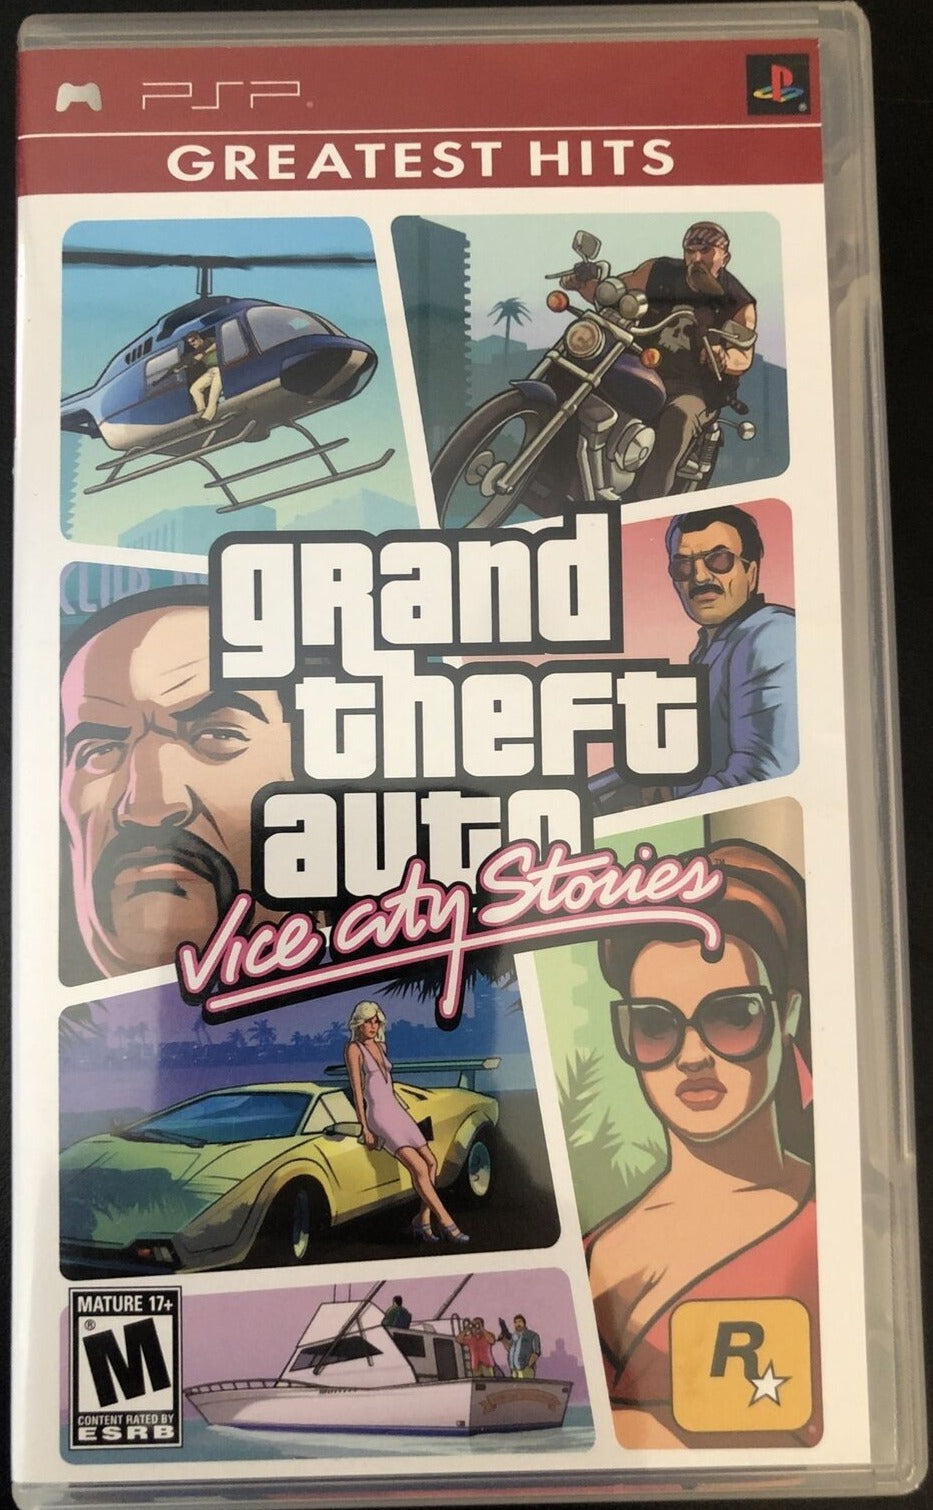 Grand Theft Auto: Liberty City Stories and Vice City Stories | Rockstar  Games | GameStop